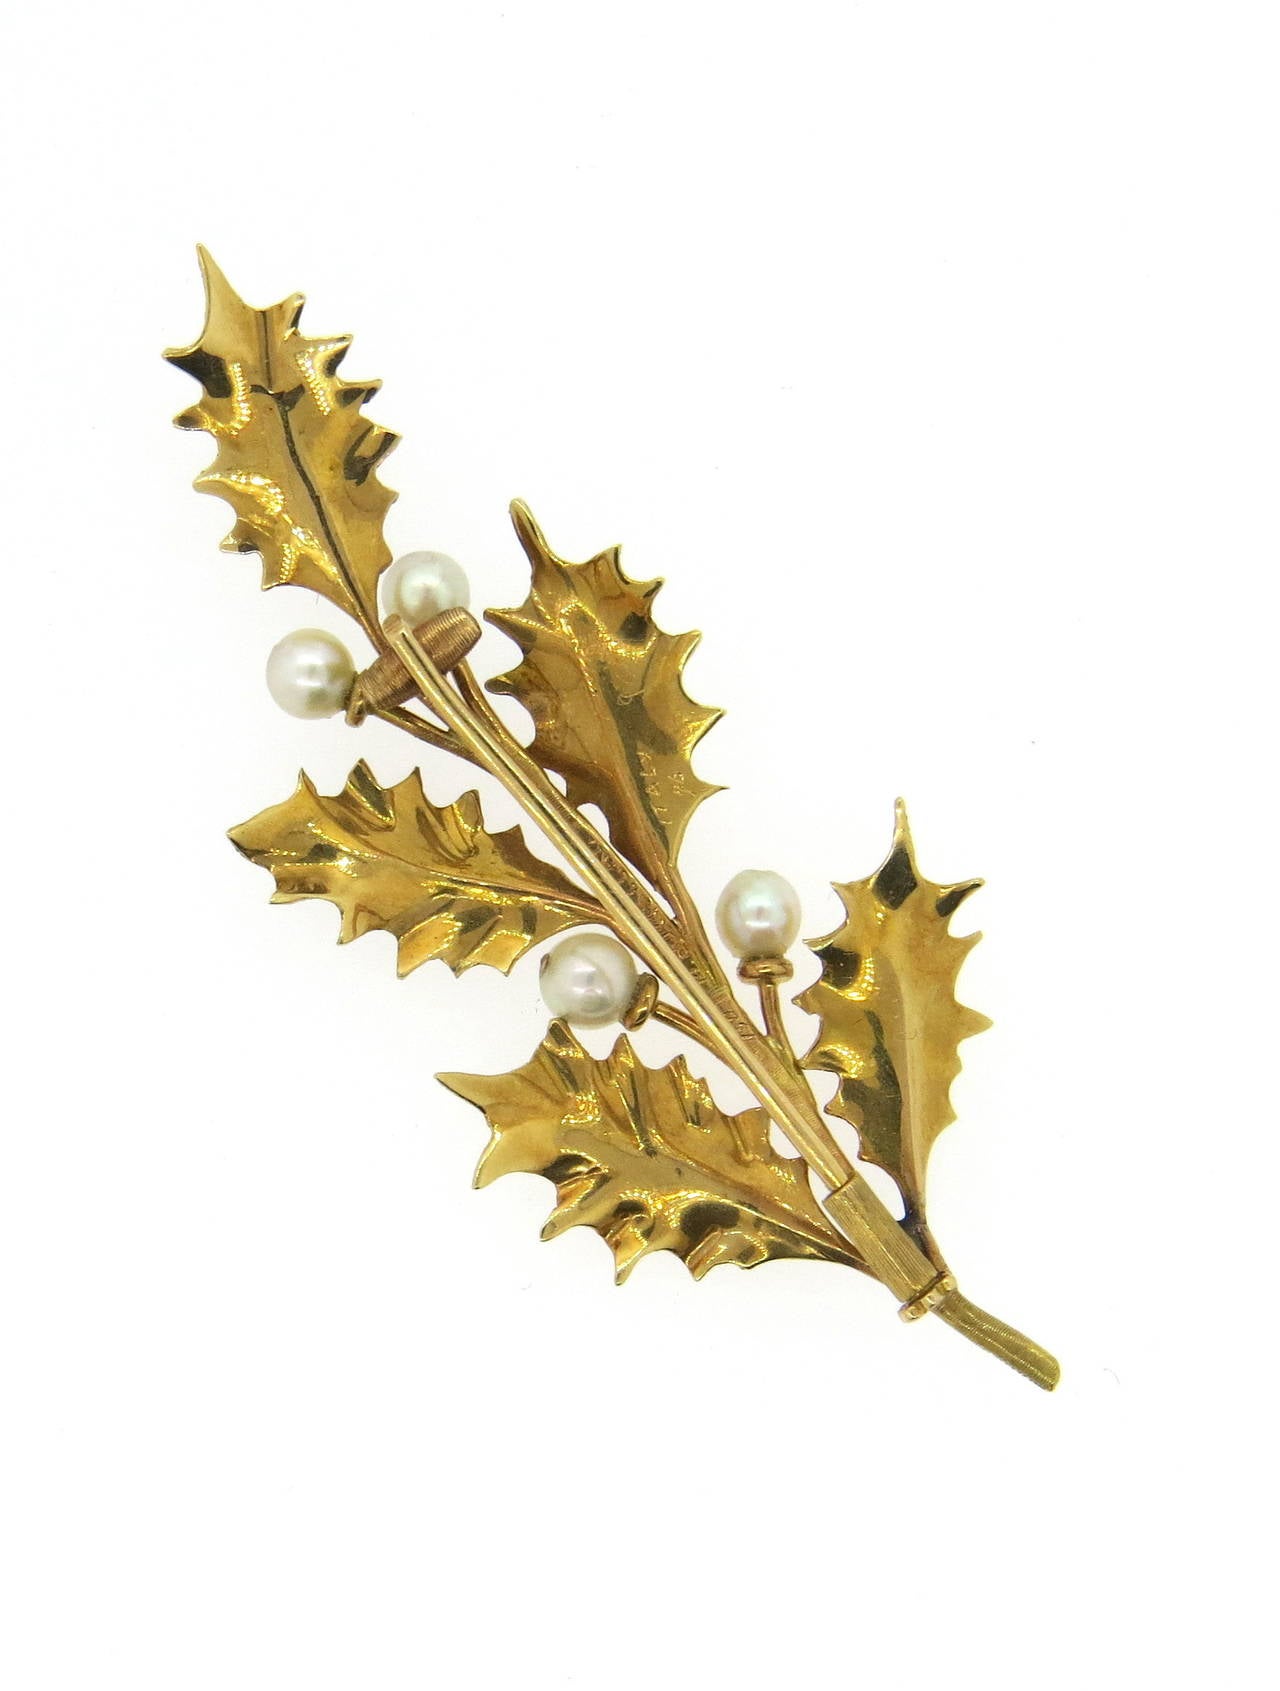 18k gold brooch pin, crafted by Mario Buccellati, set with four pearls, featuring leaf motif. Brooch measures 65mm x 27mm. Marked 750,Italy 96, M. Buccellati. Weight of the piece - 7.7 grams